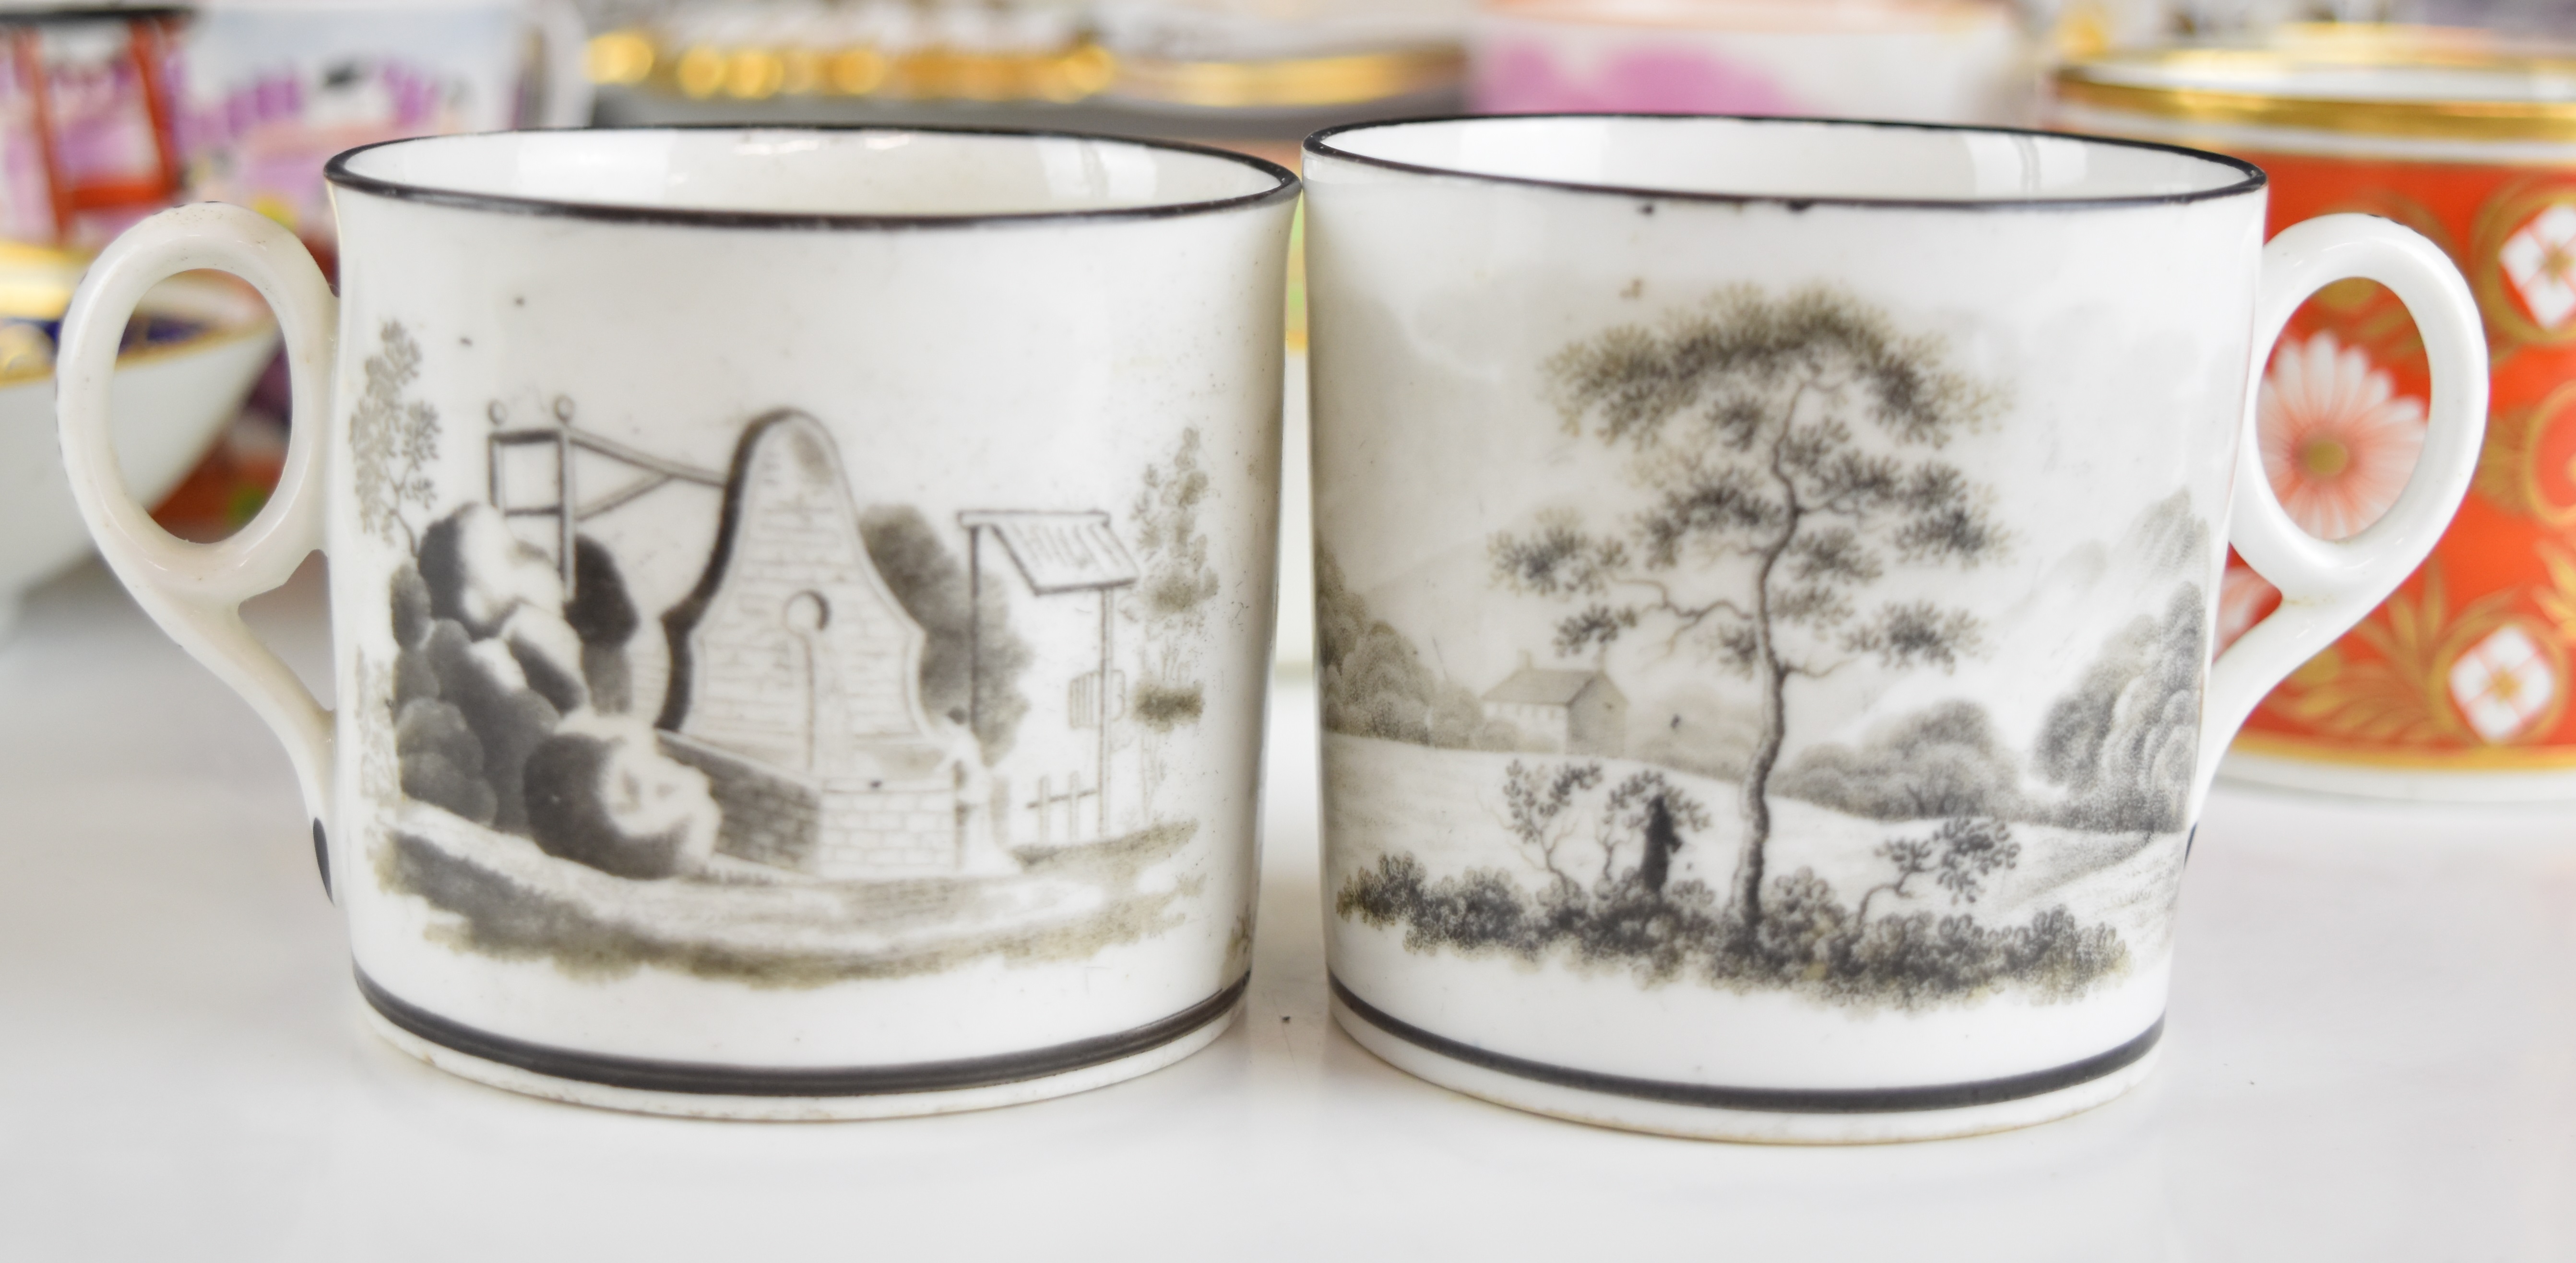 19thC porcelain saucers, dishes, coffee cans and cups including New Hall, Ridgway, bat print - Image 2 of 22